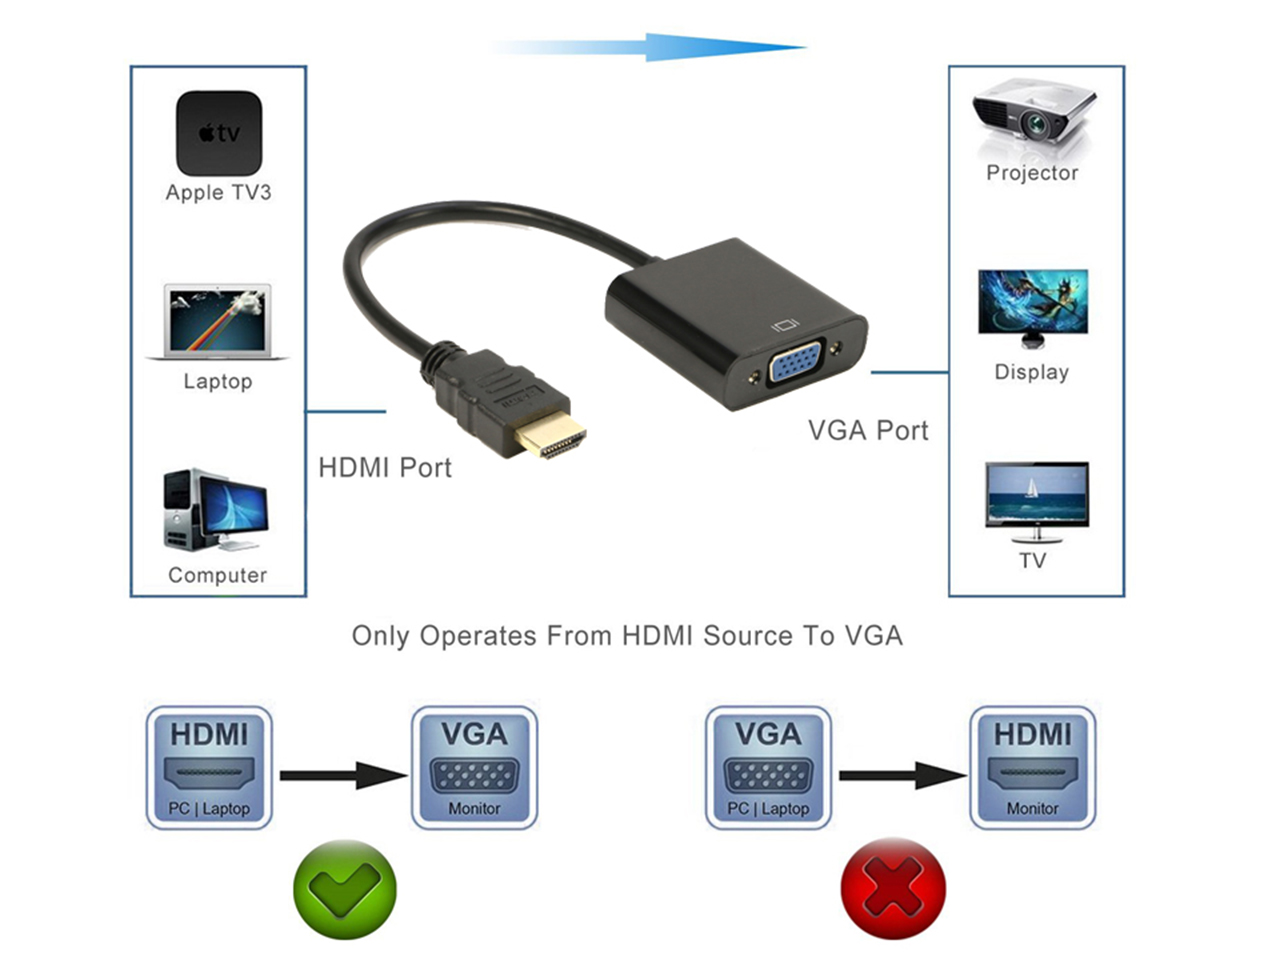 Projector Raspberry Pi PC Chromebook HDTV Laptop HDMI to VGA Xbox and More Monitor Desktop Male to Female for Computer Roku Gold-Plated HDMI to VGA Adapter 